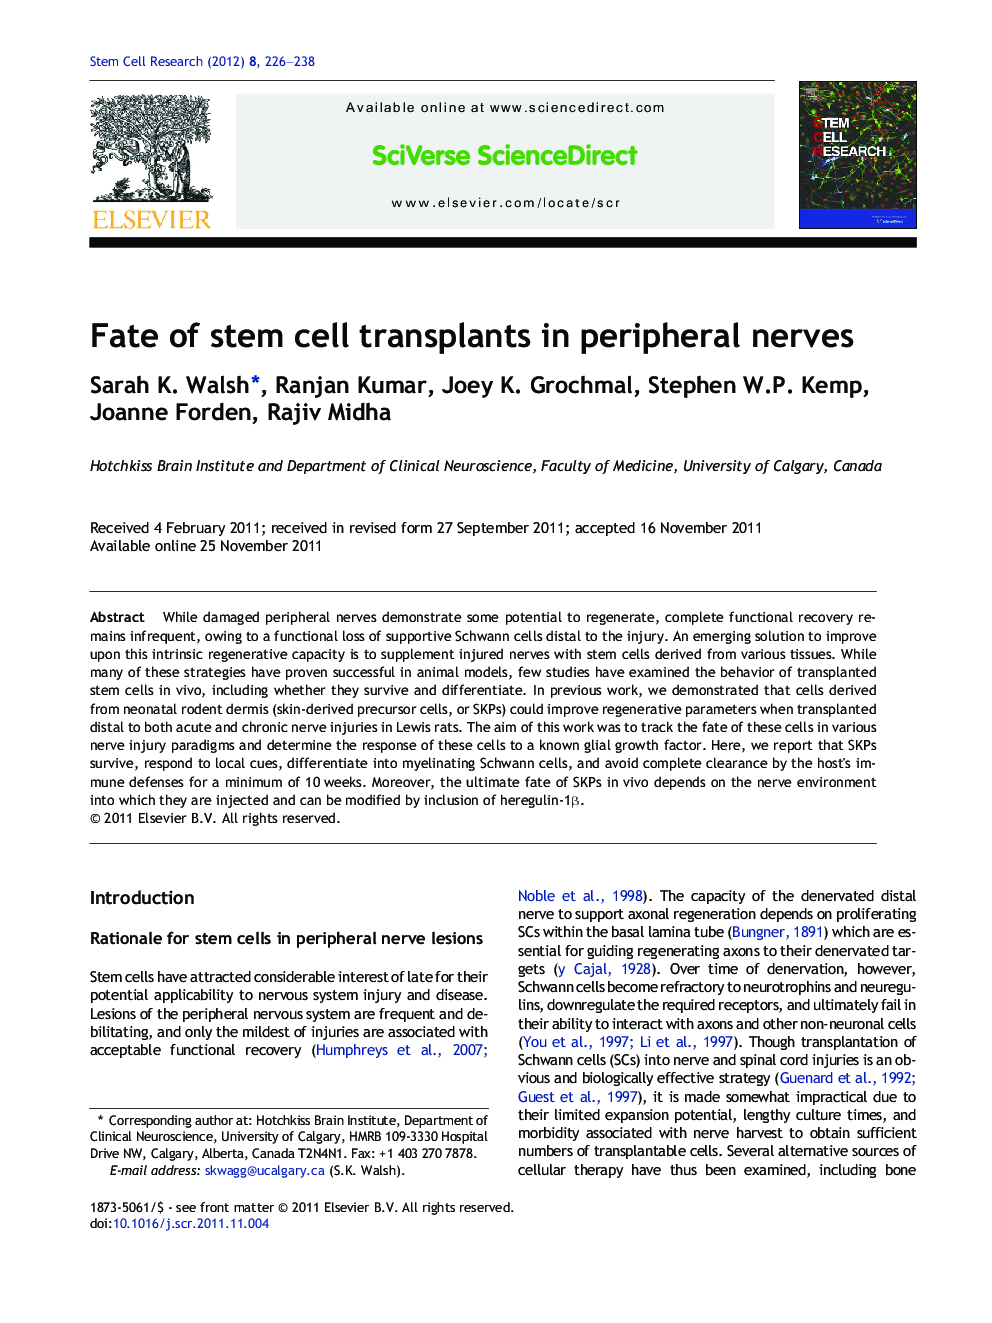 Fate of stem cell transplants in peripheral nerves